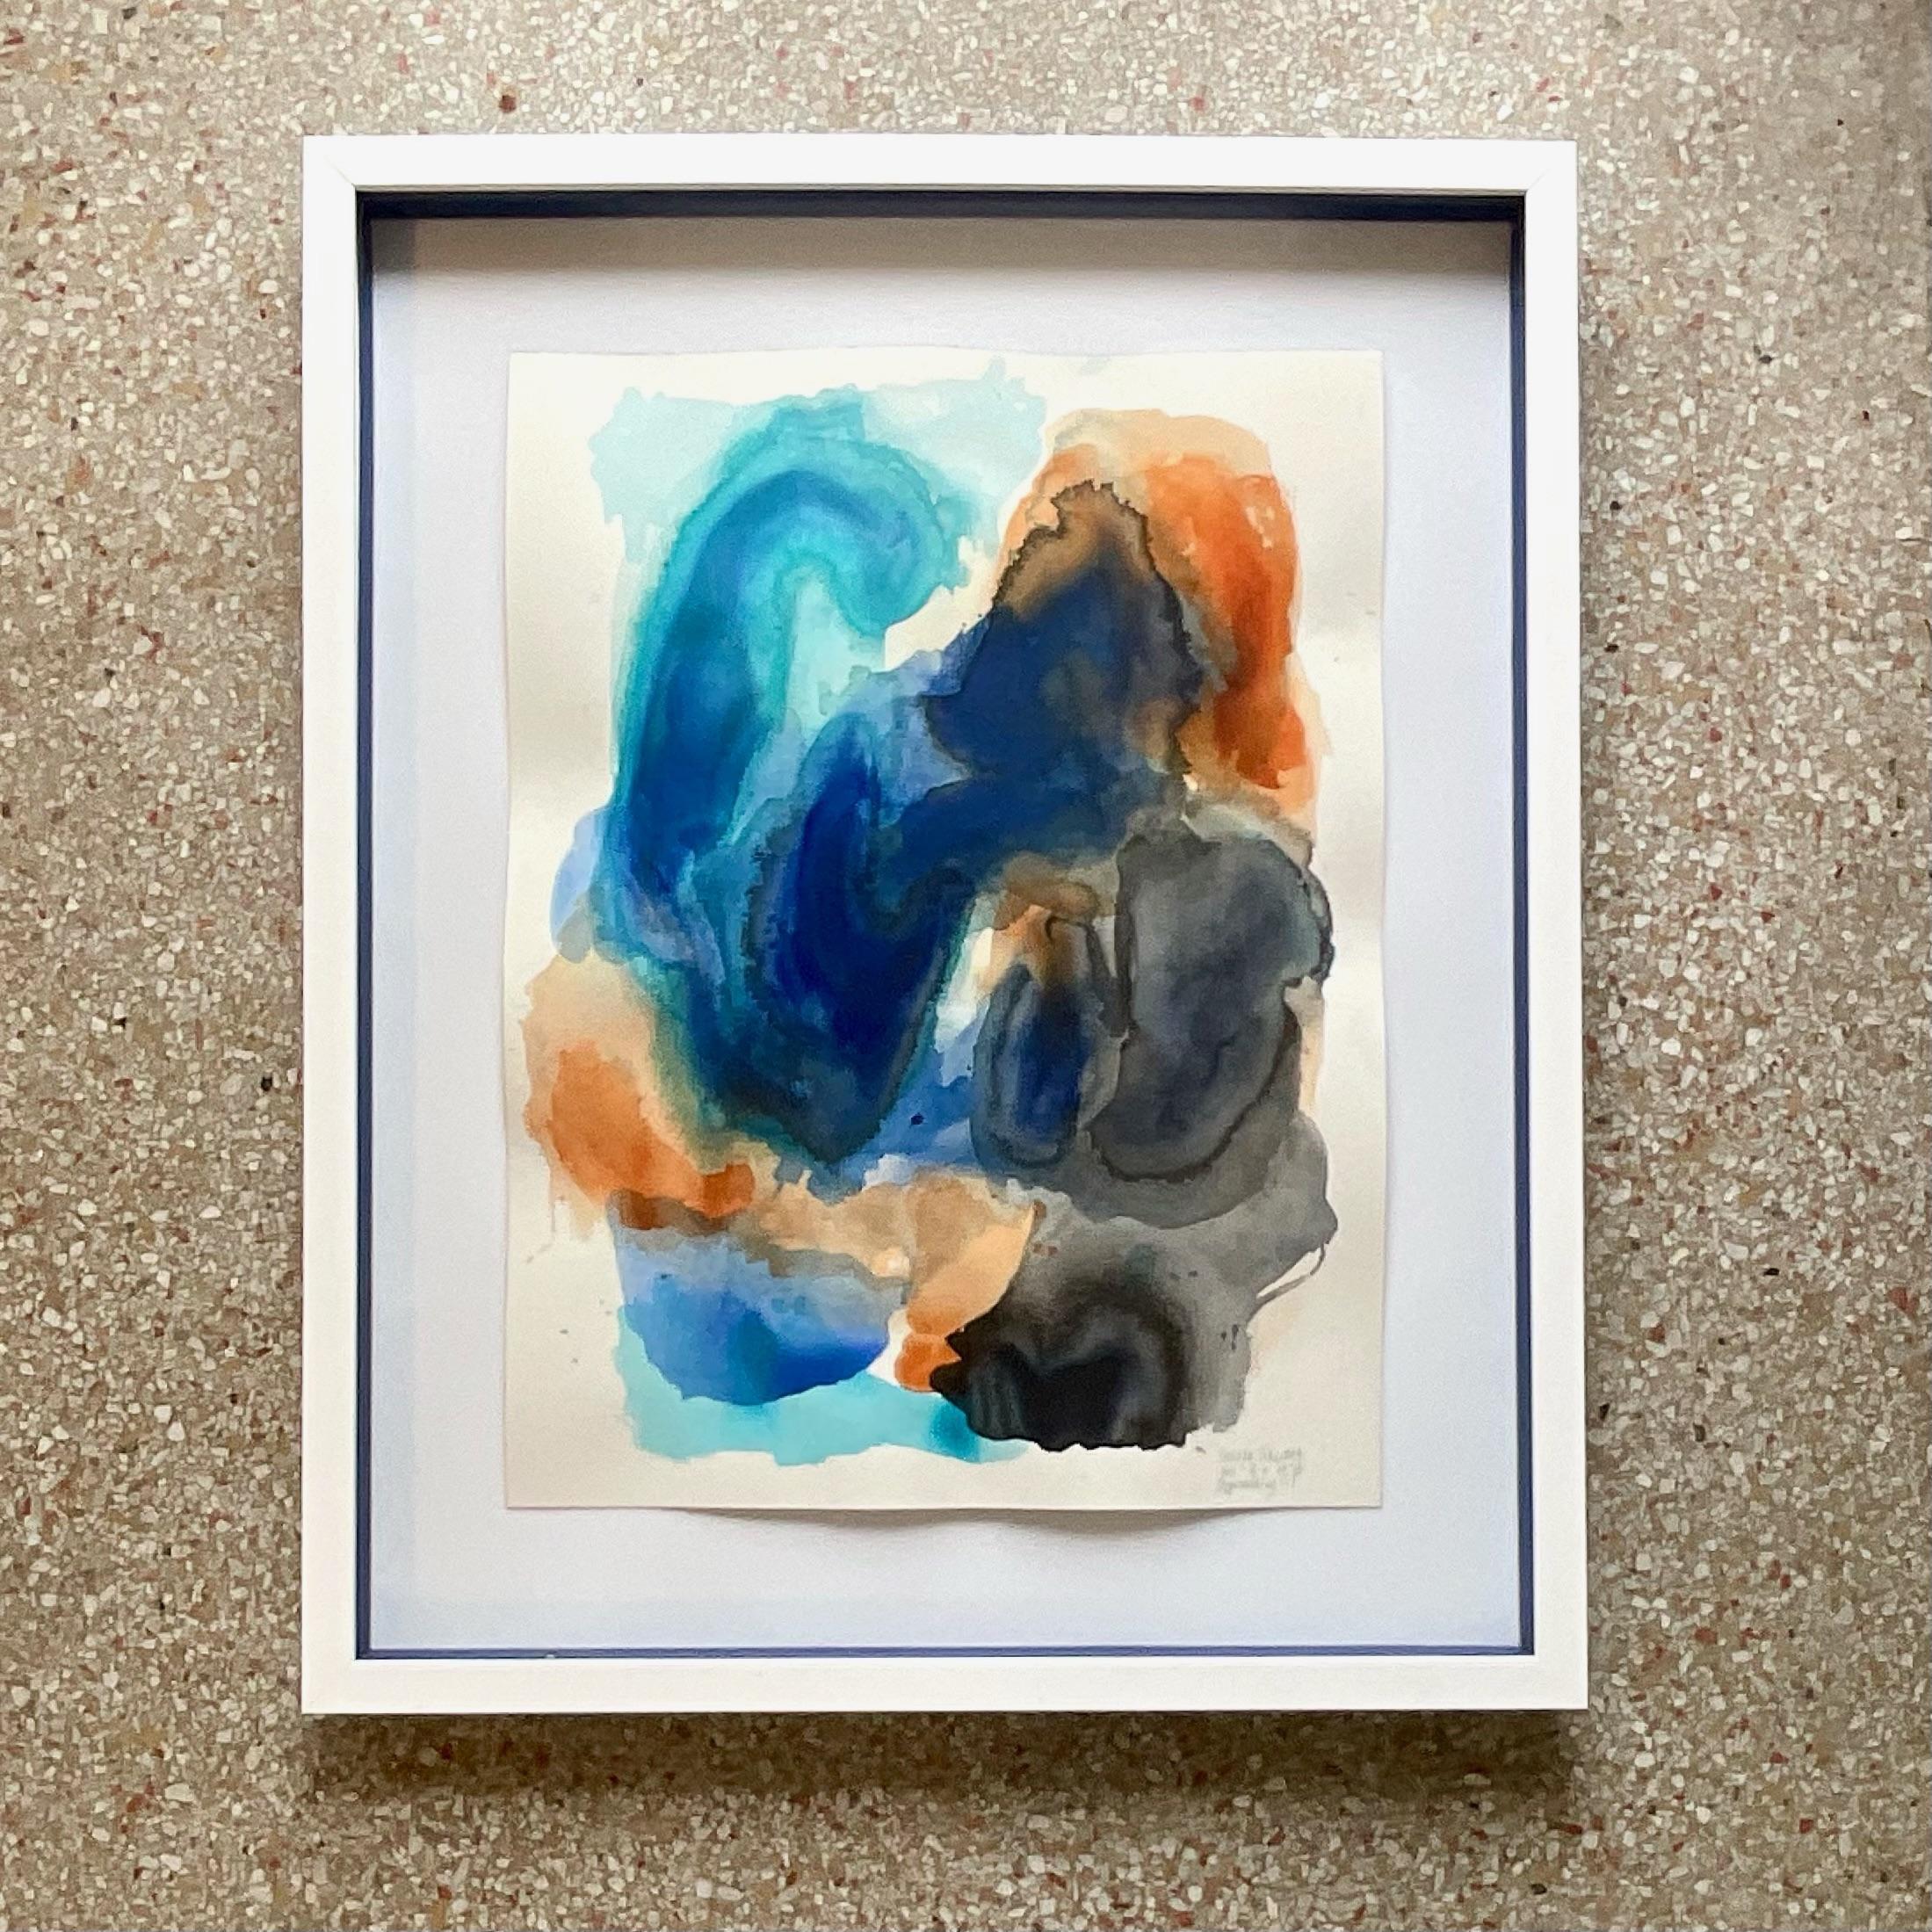 Vintage watercolor on paper artwork. This incredible block abstract is set inside a layered shadow box with a complimentary navy interior border and sleek white frame. This is one of a set of 2, the other is also available. Signed and titled by the